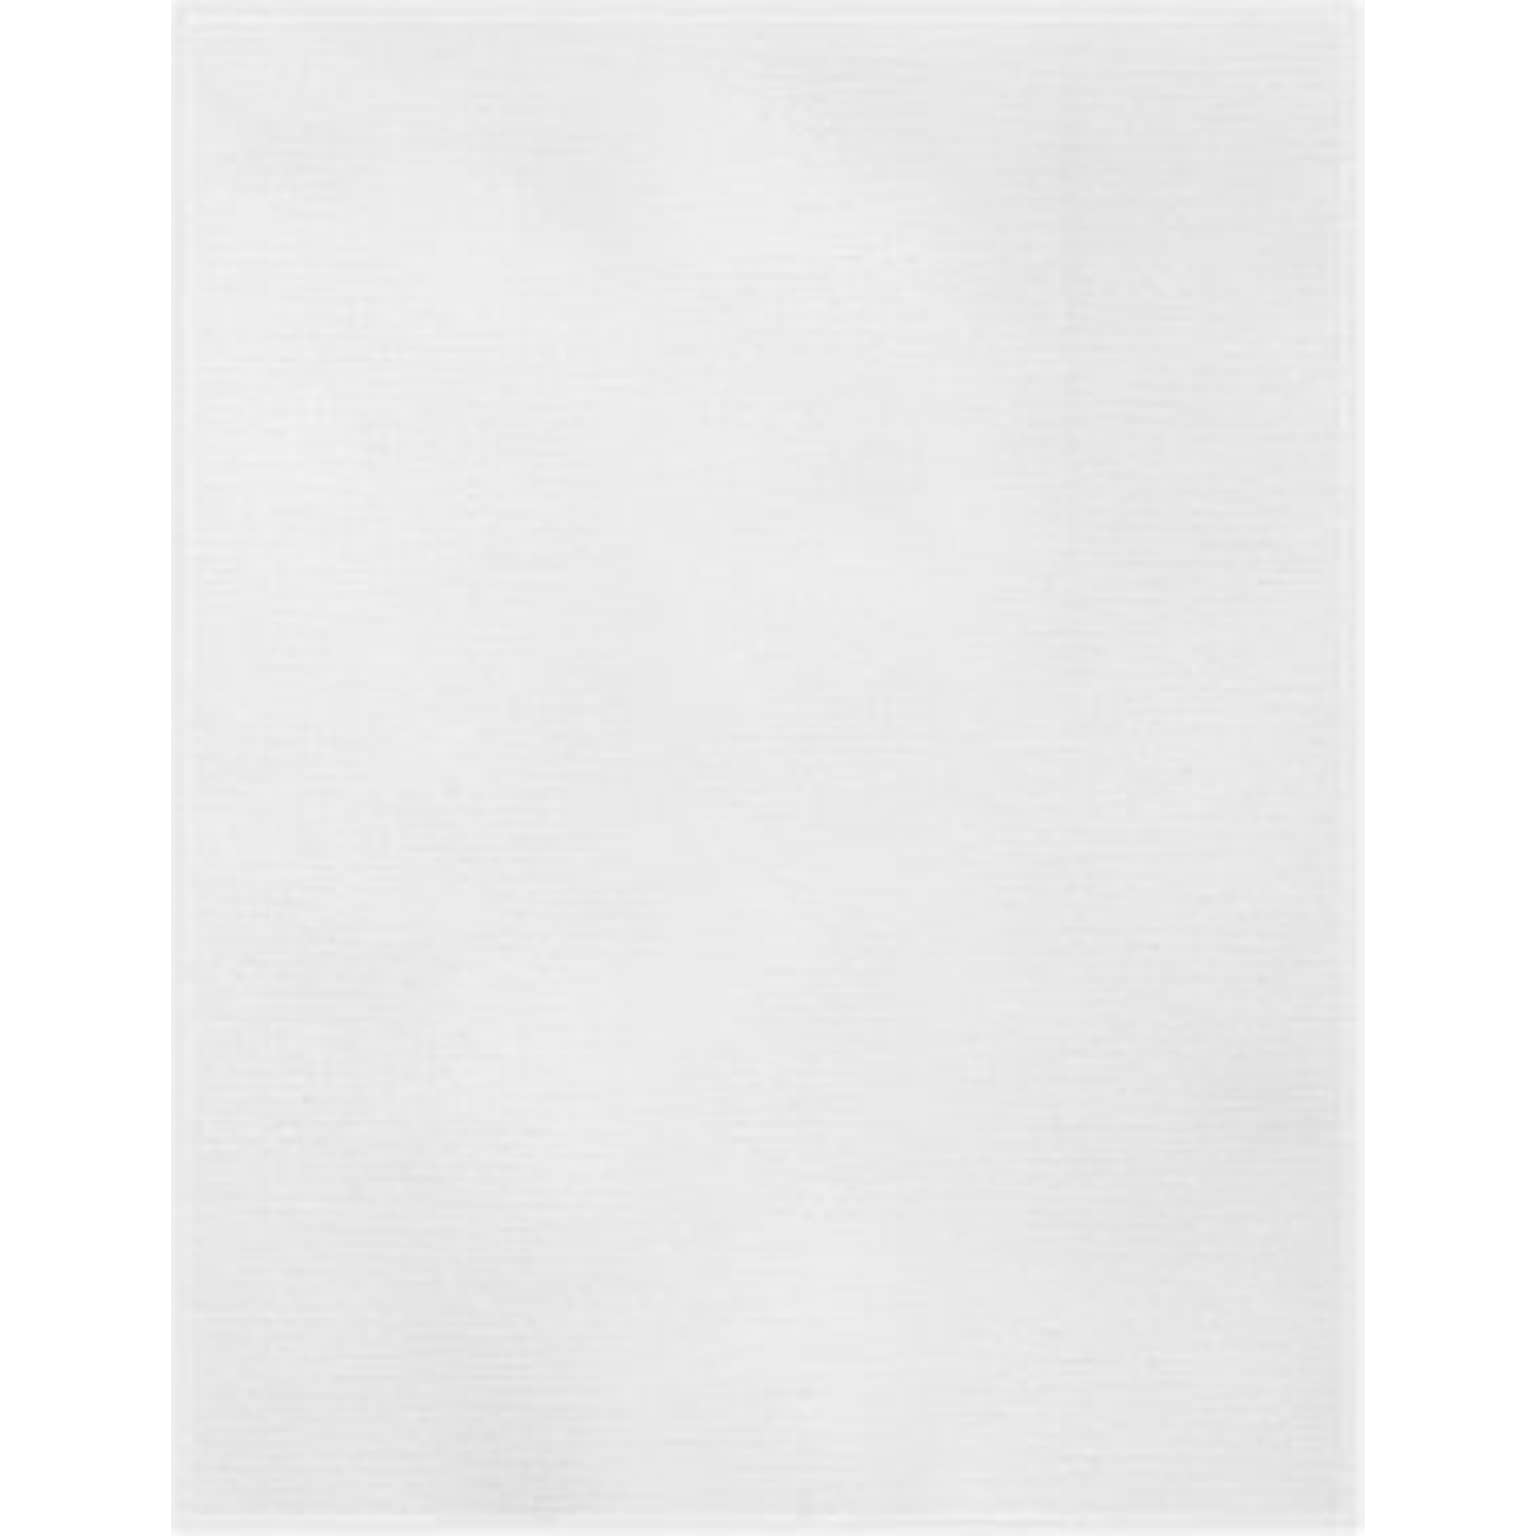 LUX 11 x 17 Specialty Paper, 32 lbs., White Linen, 250 Sheets/Pack (1117-P-WLI-250)